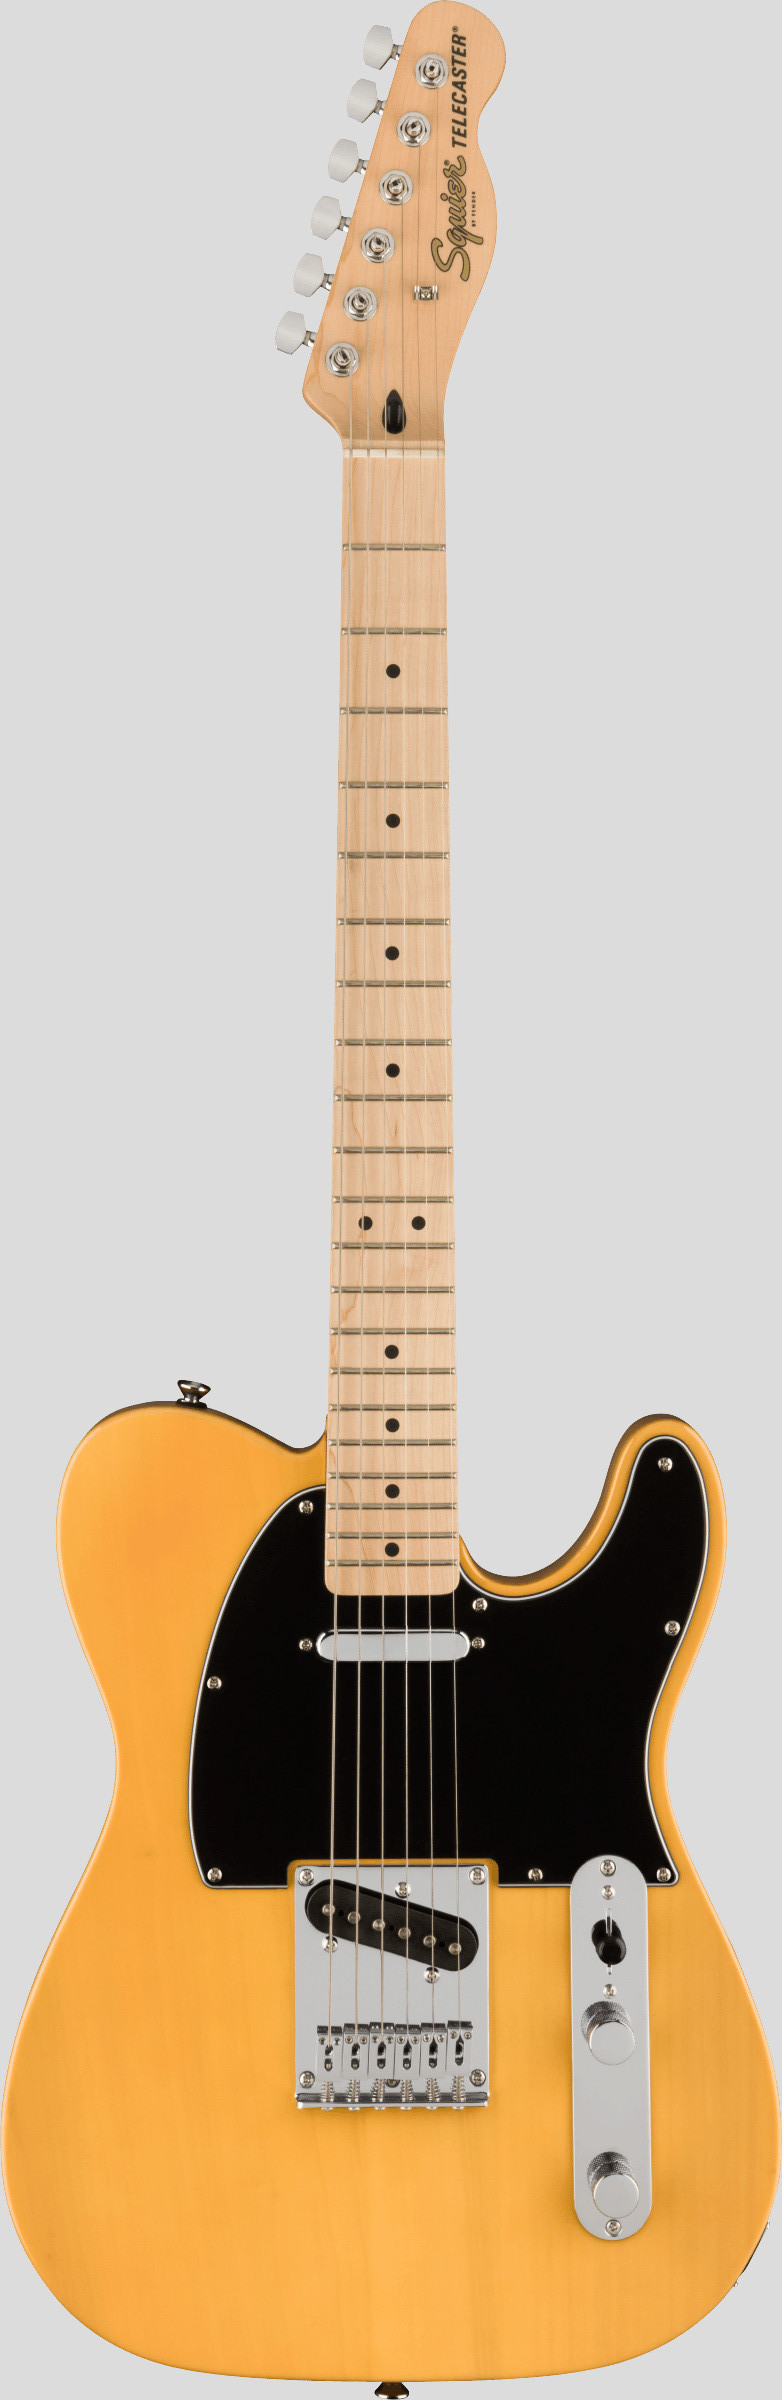 Squier by Fender Affinity Telecaster Butterscotch Blonde 1